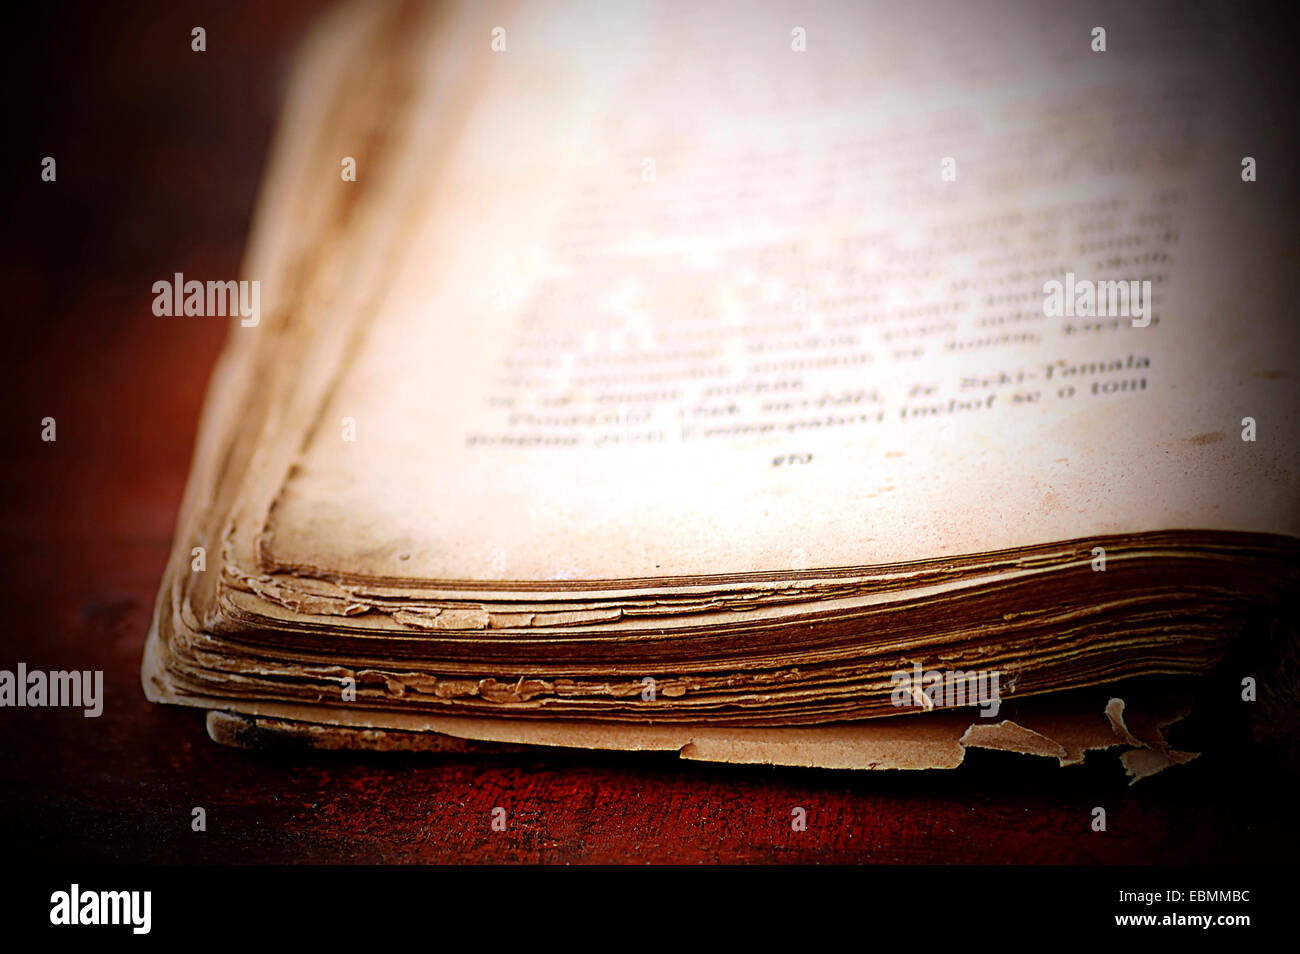 close up of the open pages of an old damaged book Stock Photo